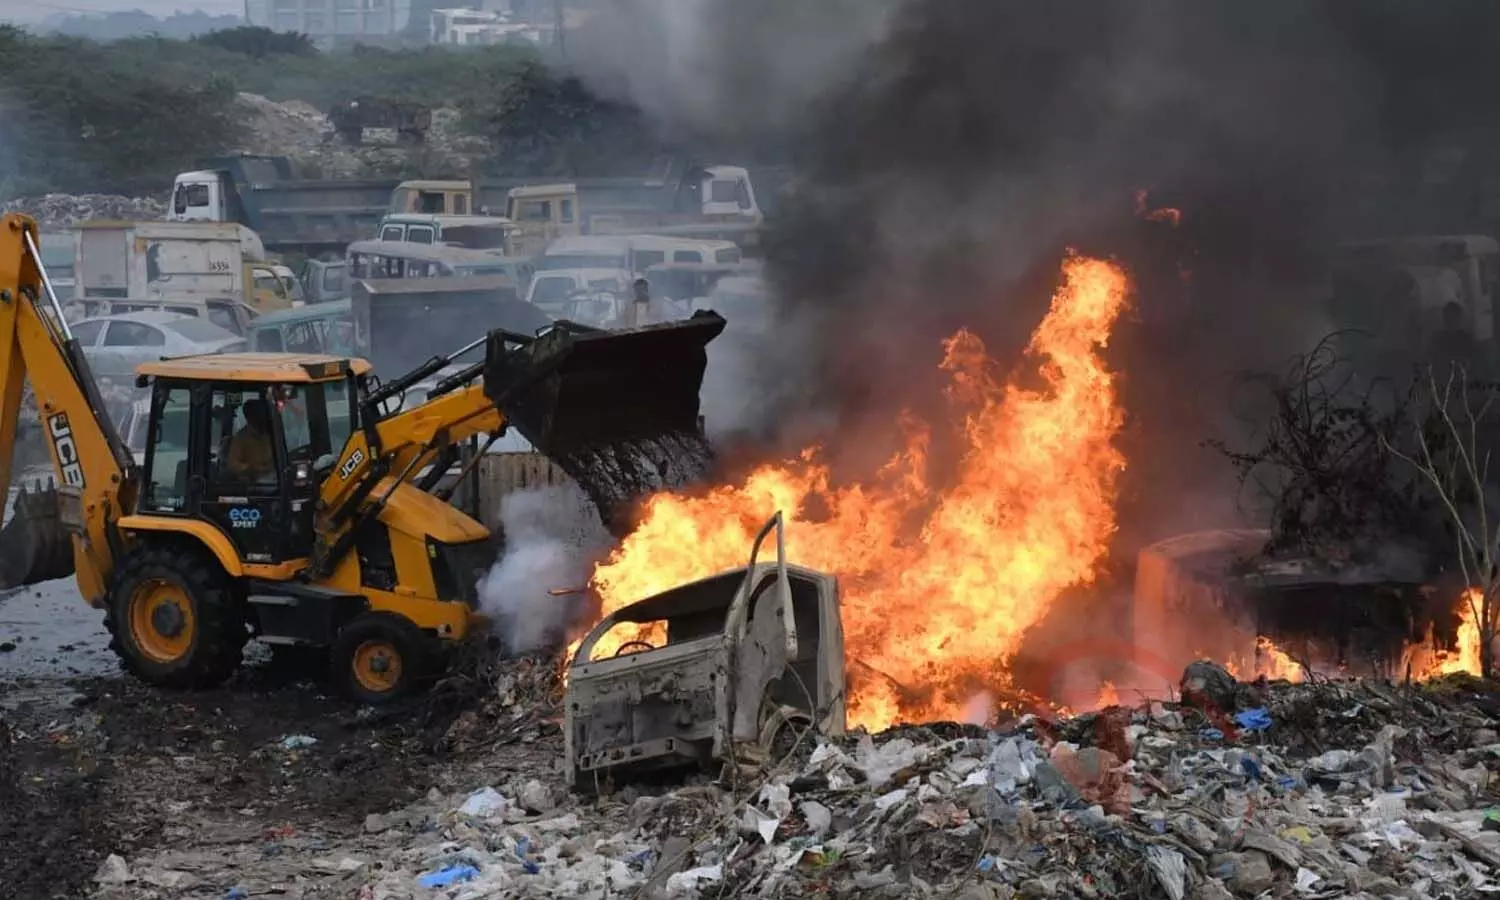 Municipal employees extinguished the fire with garbage, the team of fire brigade did not reach